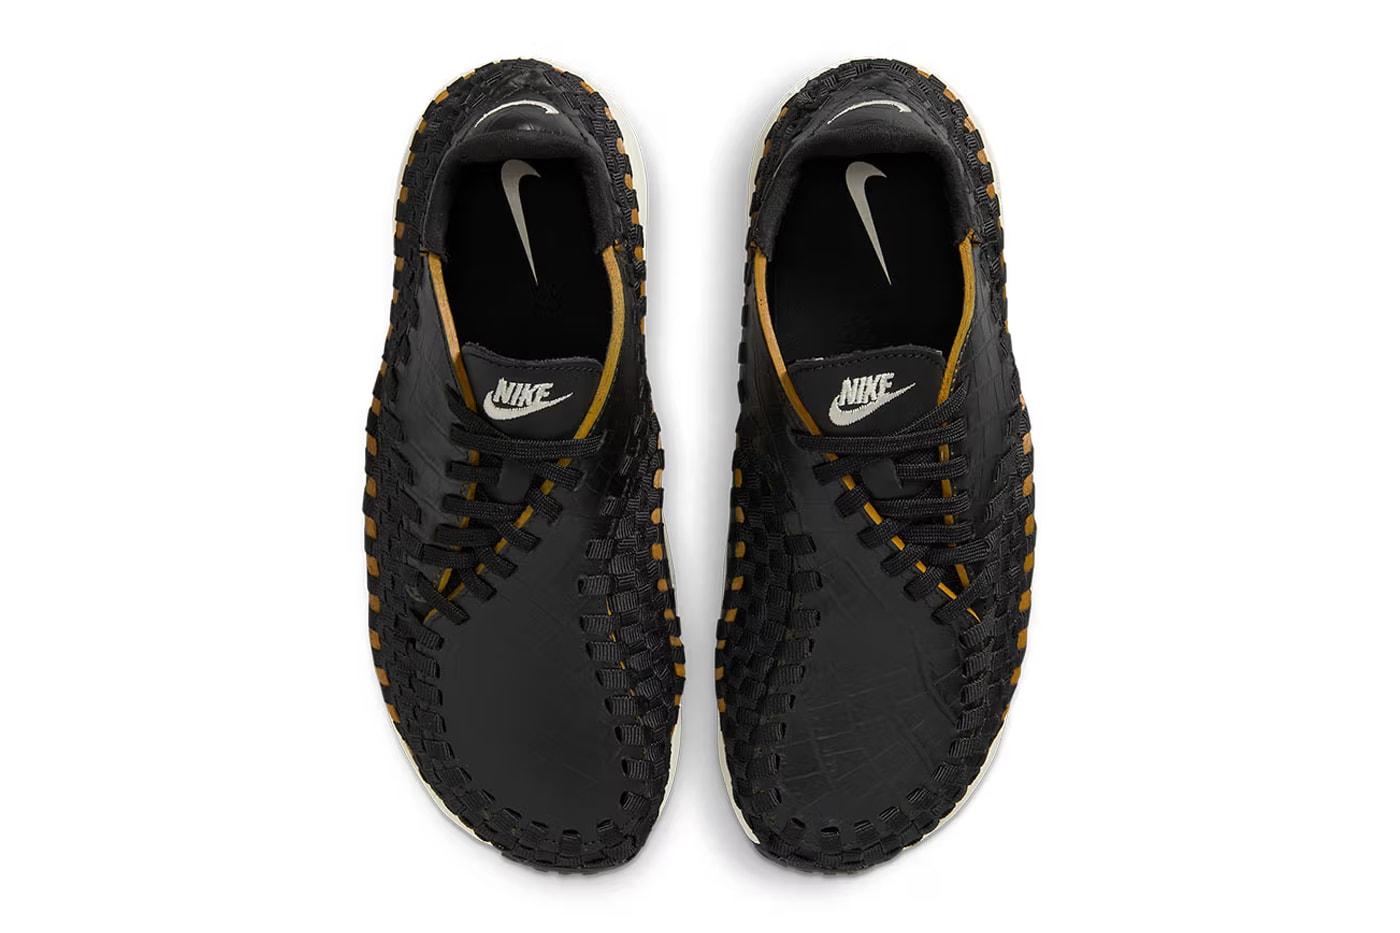 nike air footscape woven black croc FQ8129 010 release date info store list buying guide photos price 